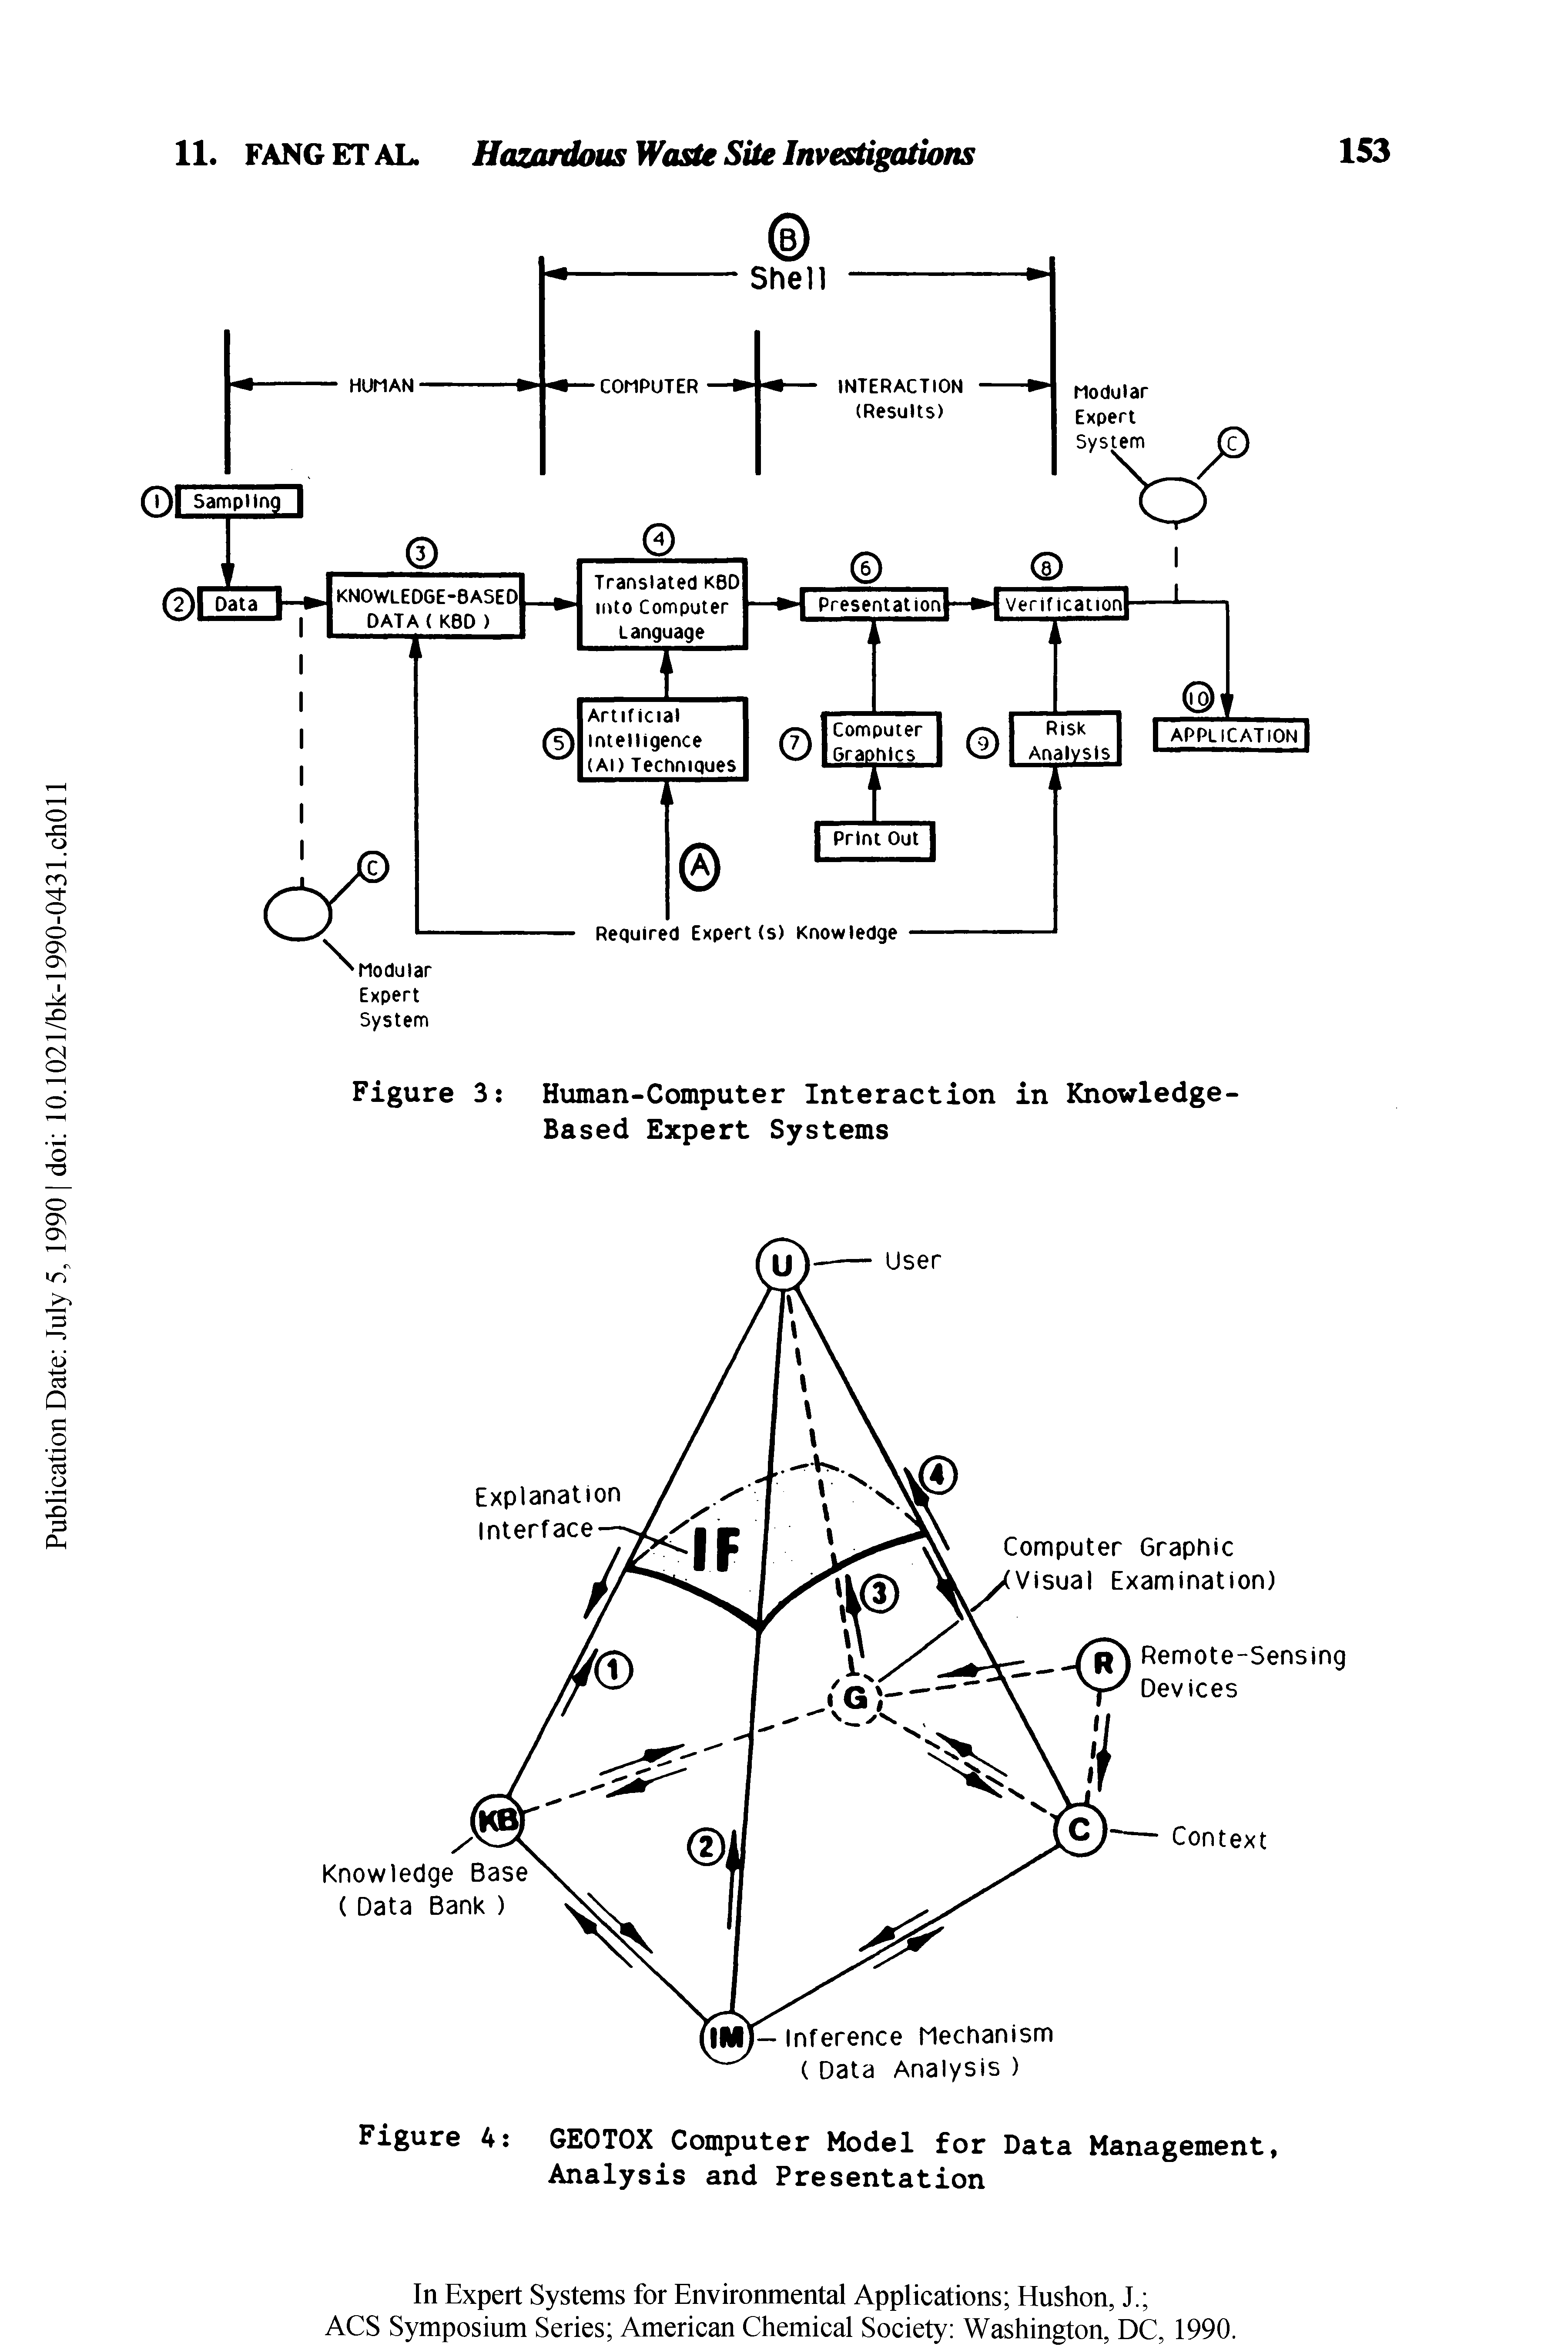 Figure 3 Human-Computer Interaction in Knowledge-Based Expert Systems...